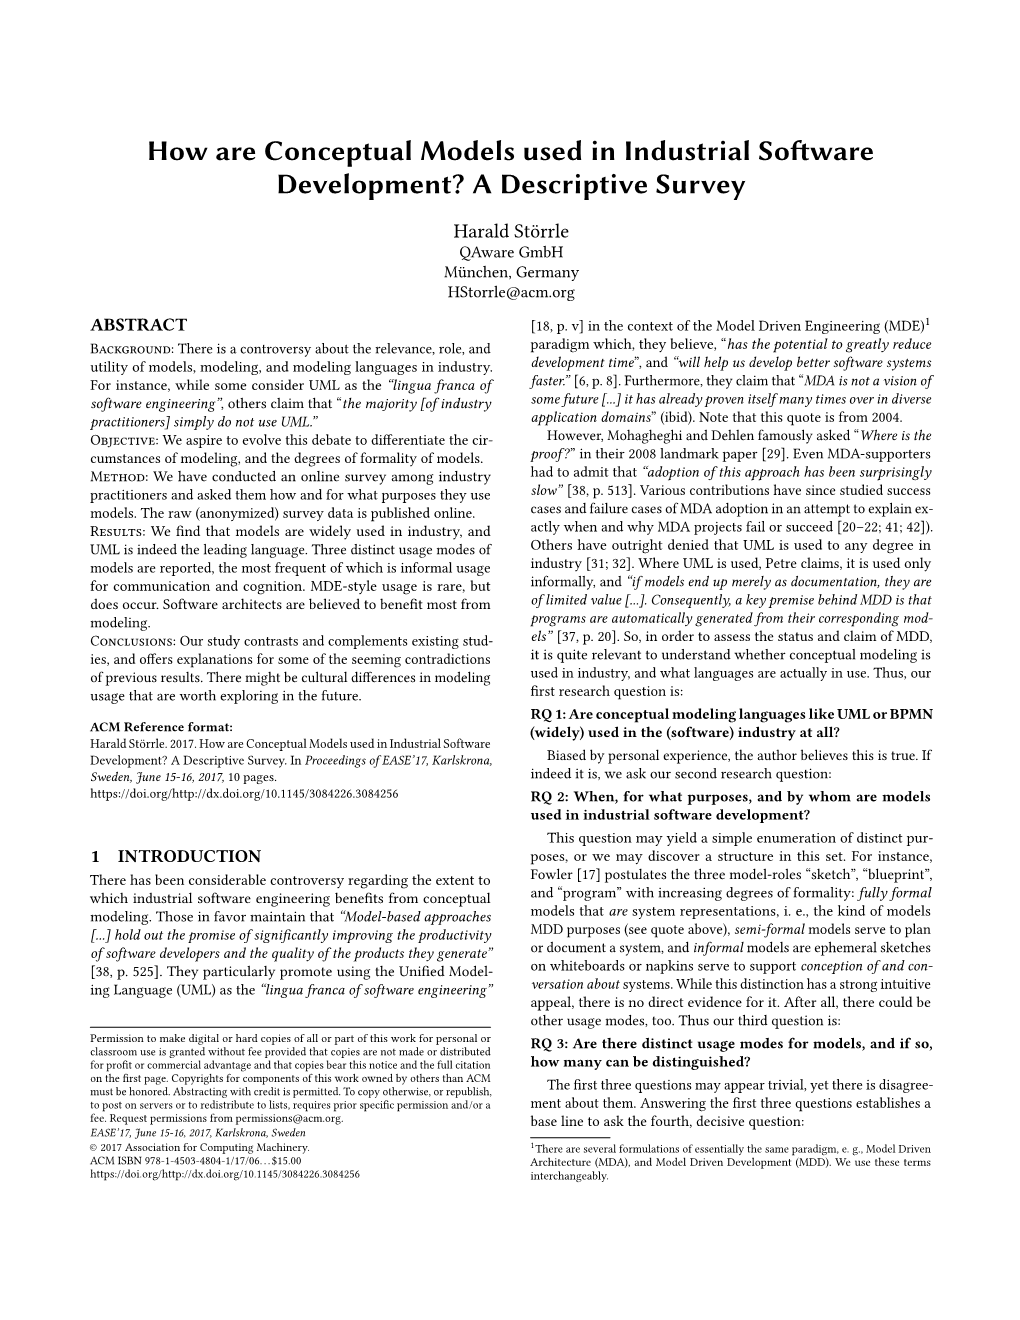 How Are Conceptual Models Used in Industrial Software Development? a Descriptive Survey